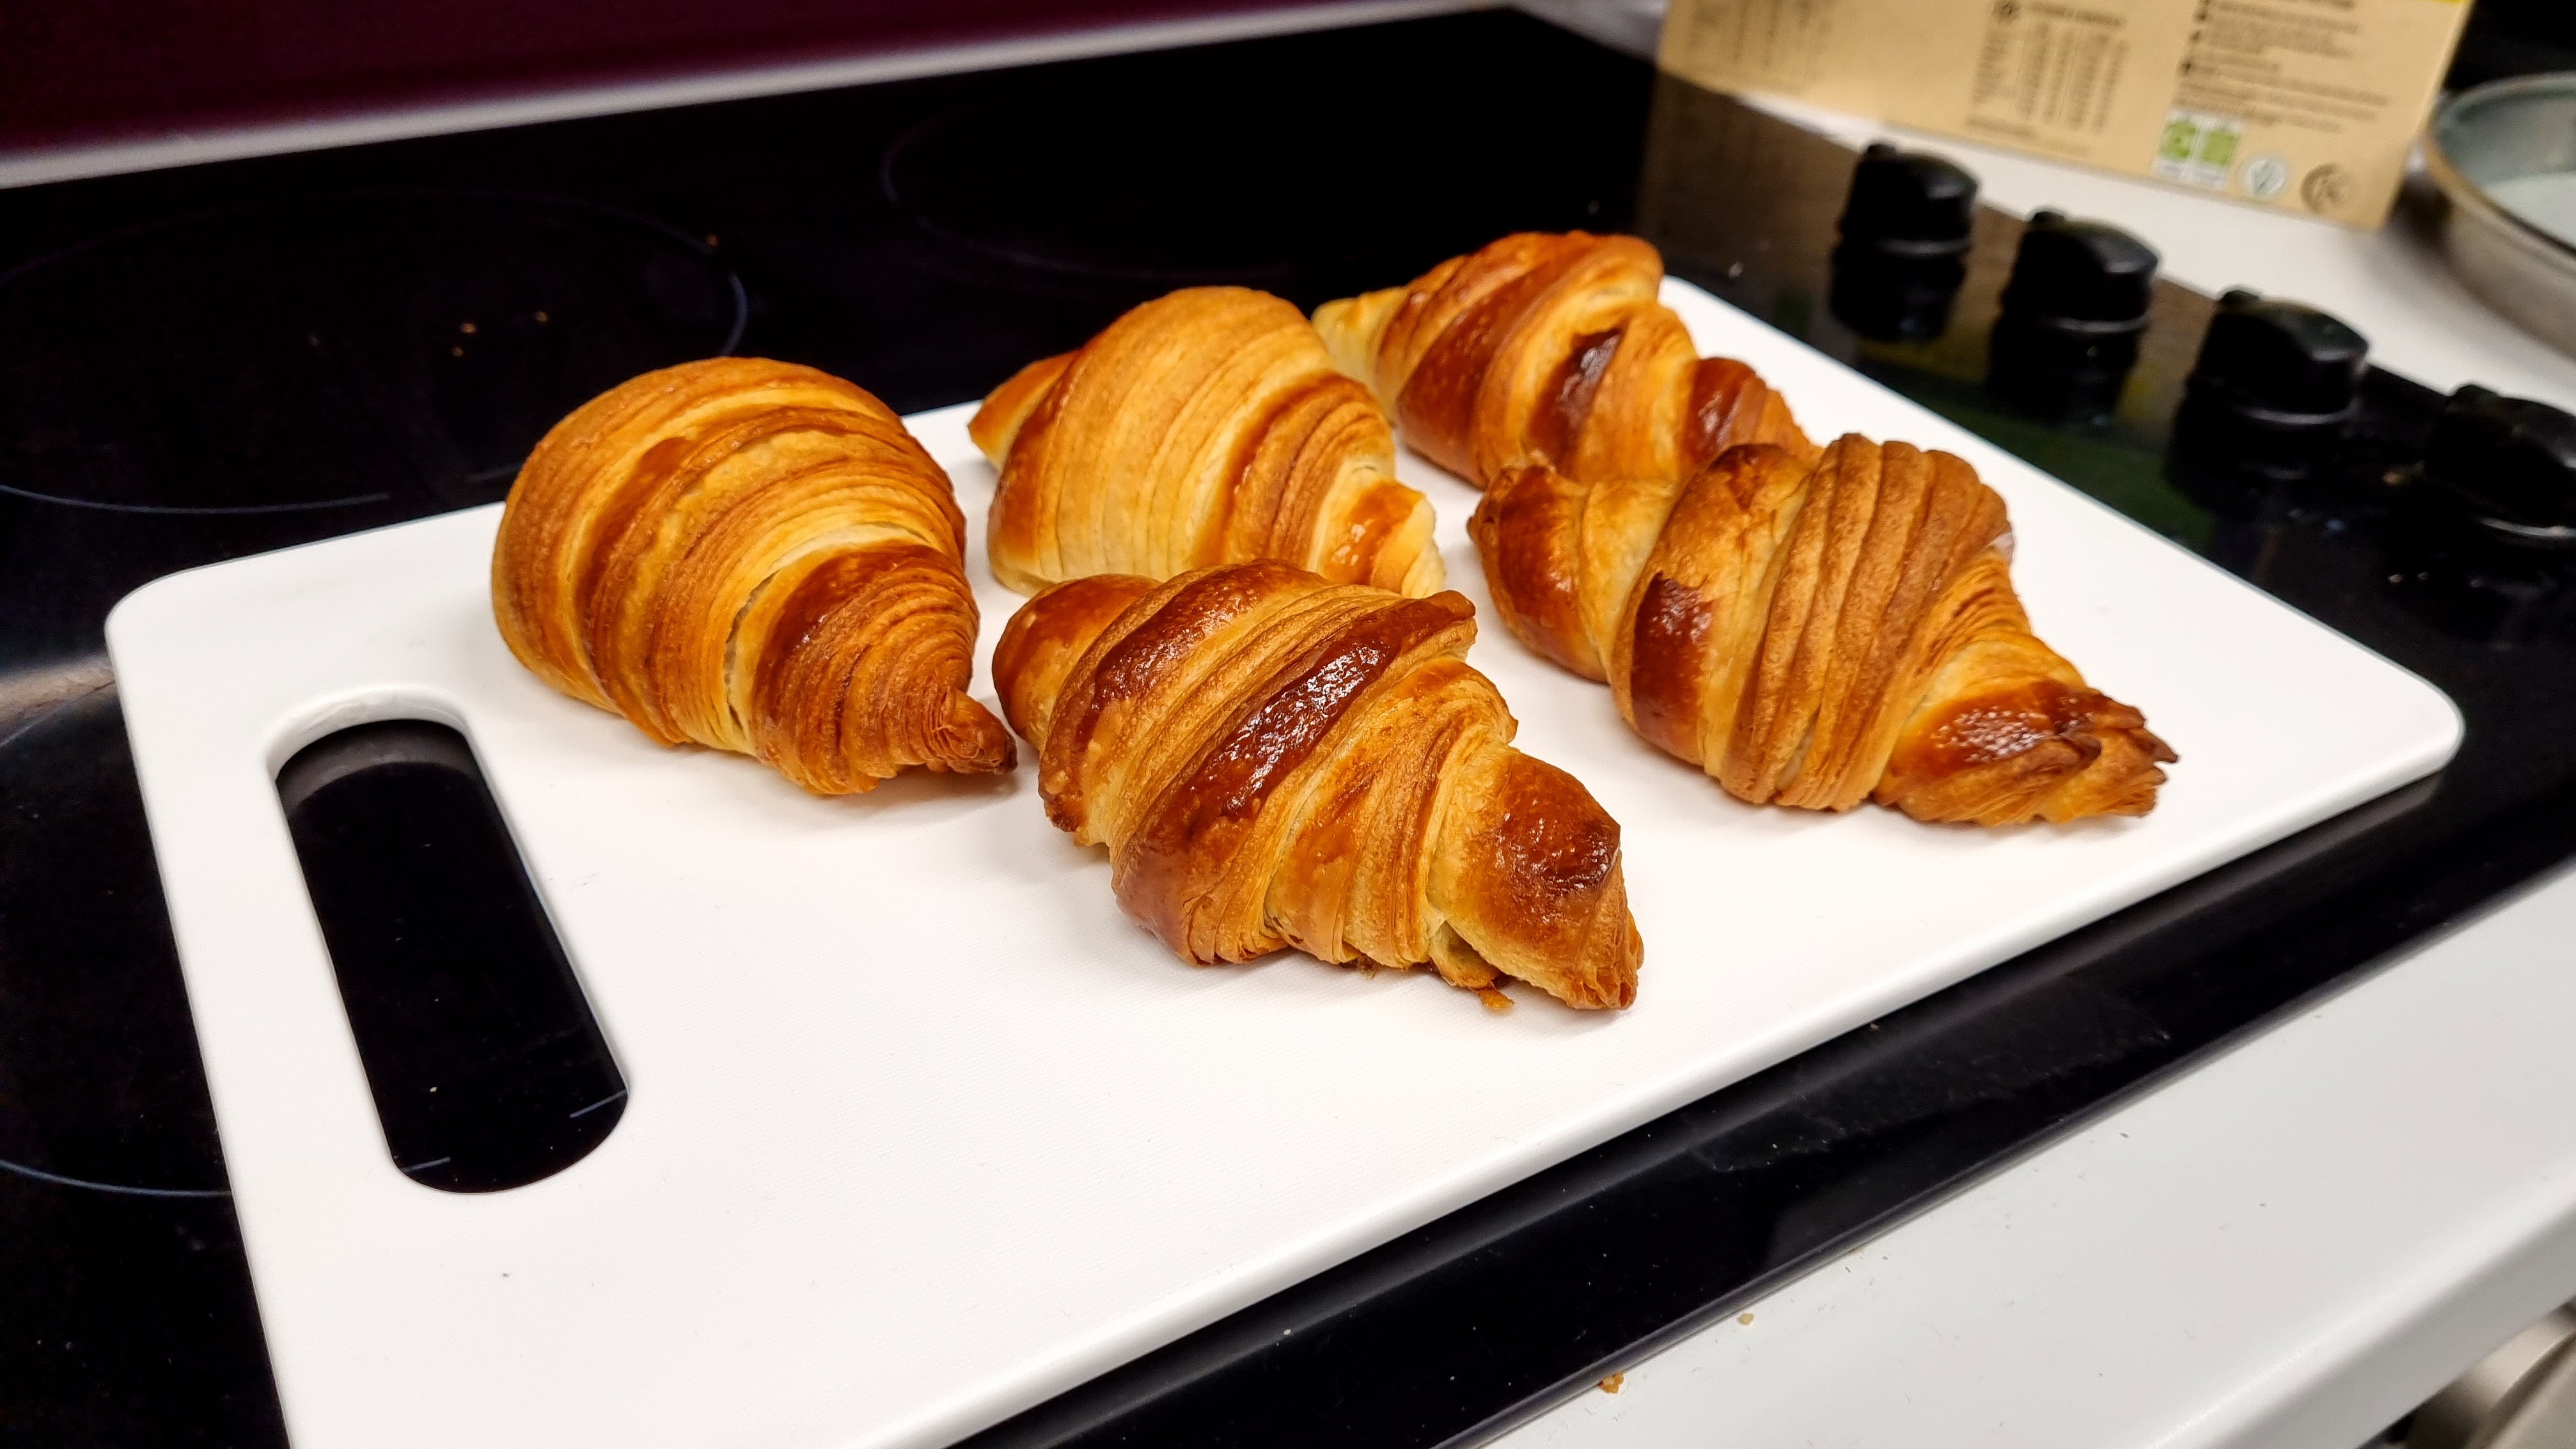 Image of Homemade Croissants